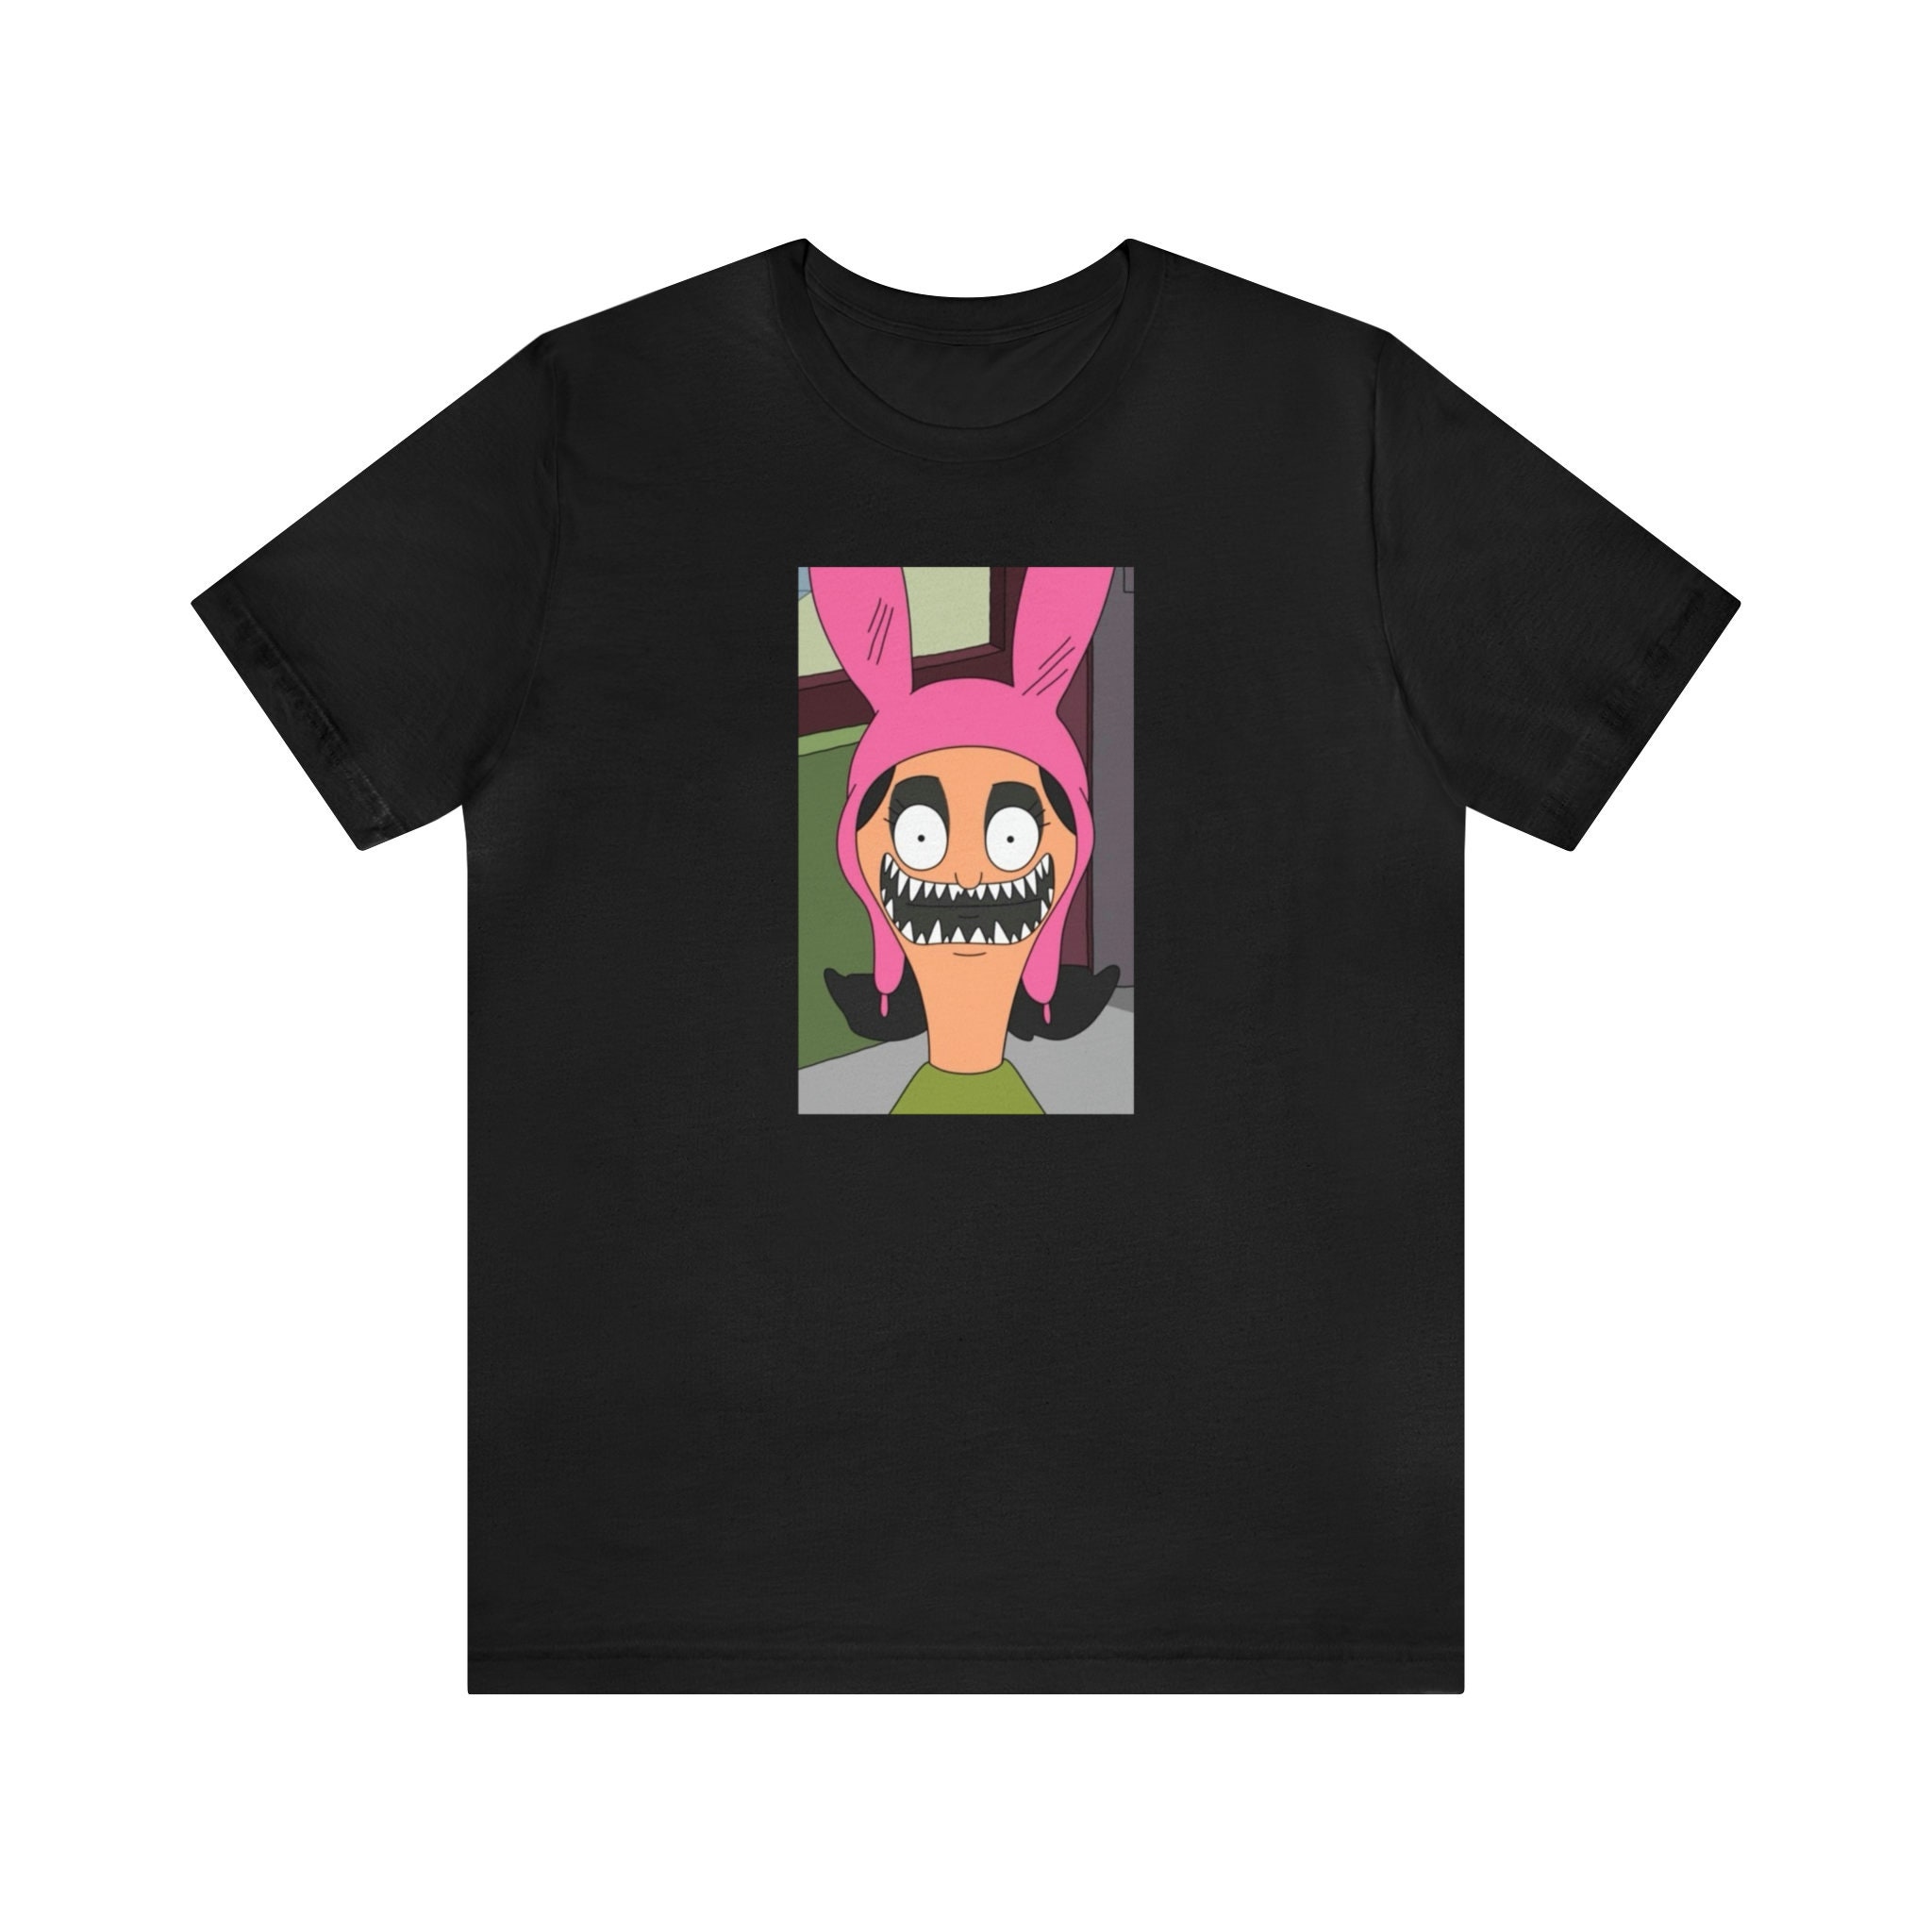 Nightmare Louise Belcher Tote Bag for Sale by melissarc97